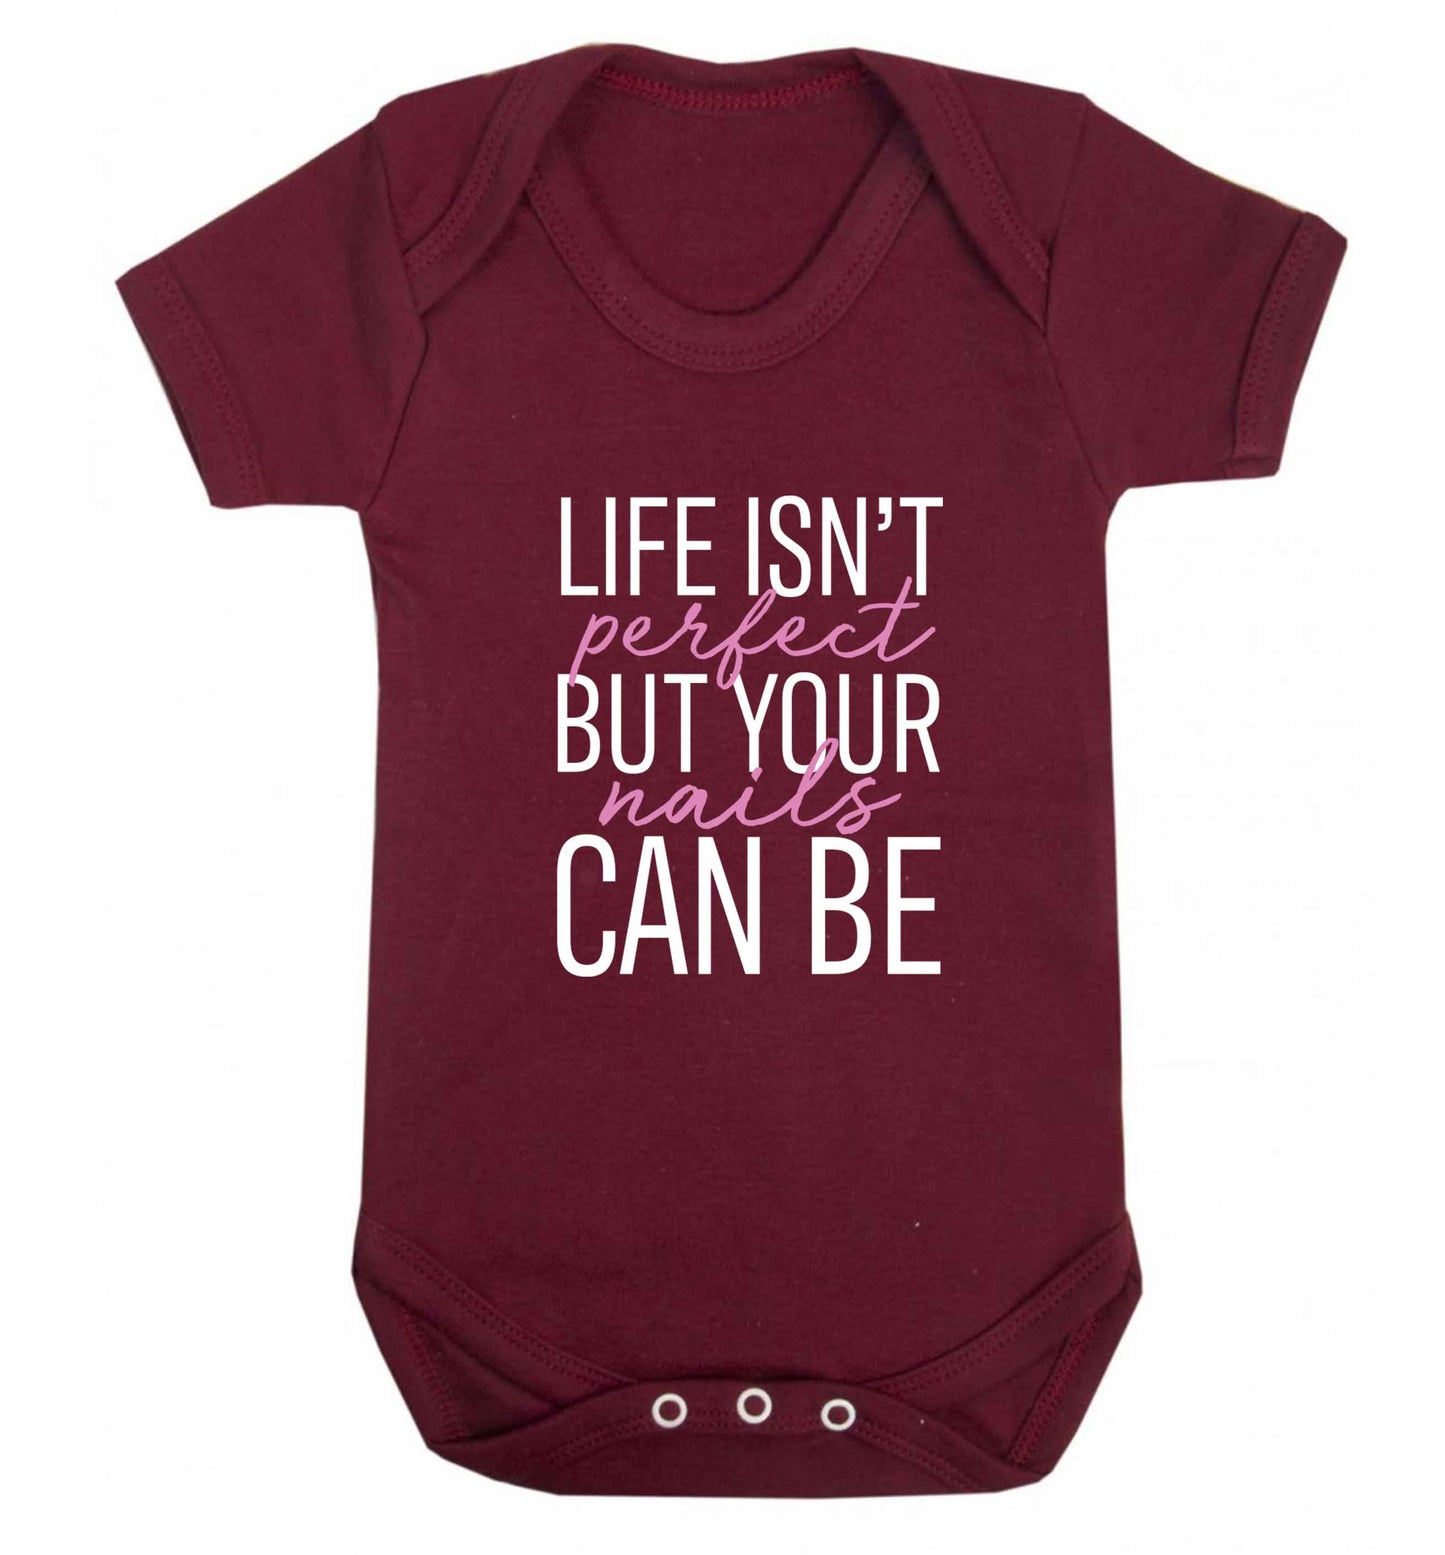 Life isn't perfect but your nails can be baby vest maroon 18-24 months